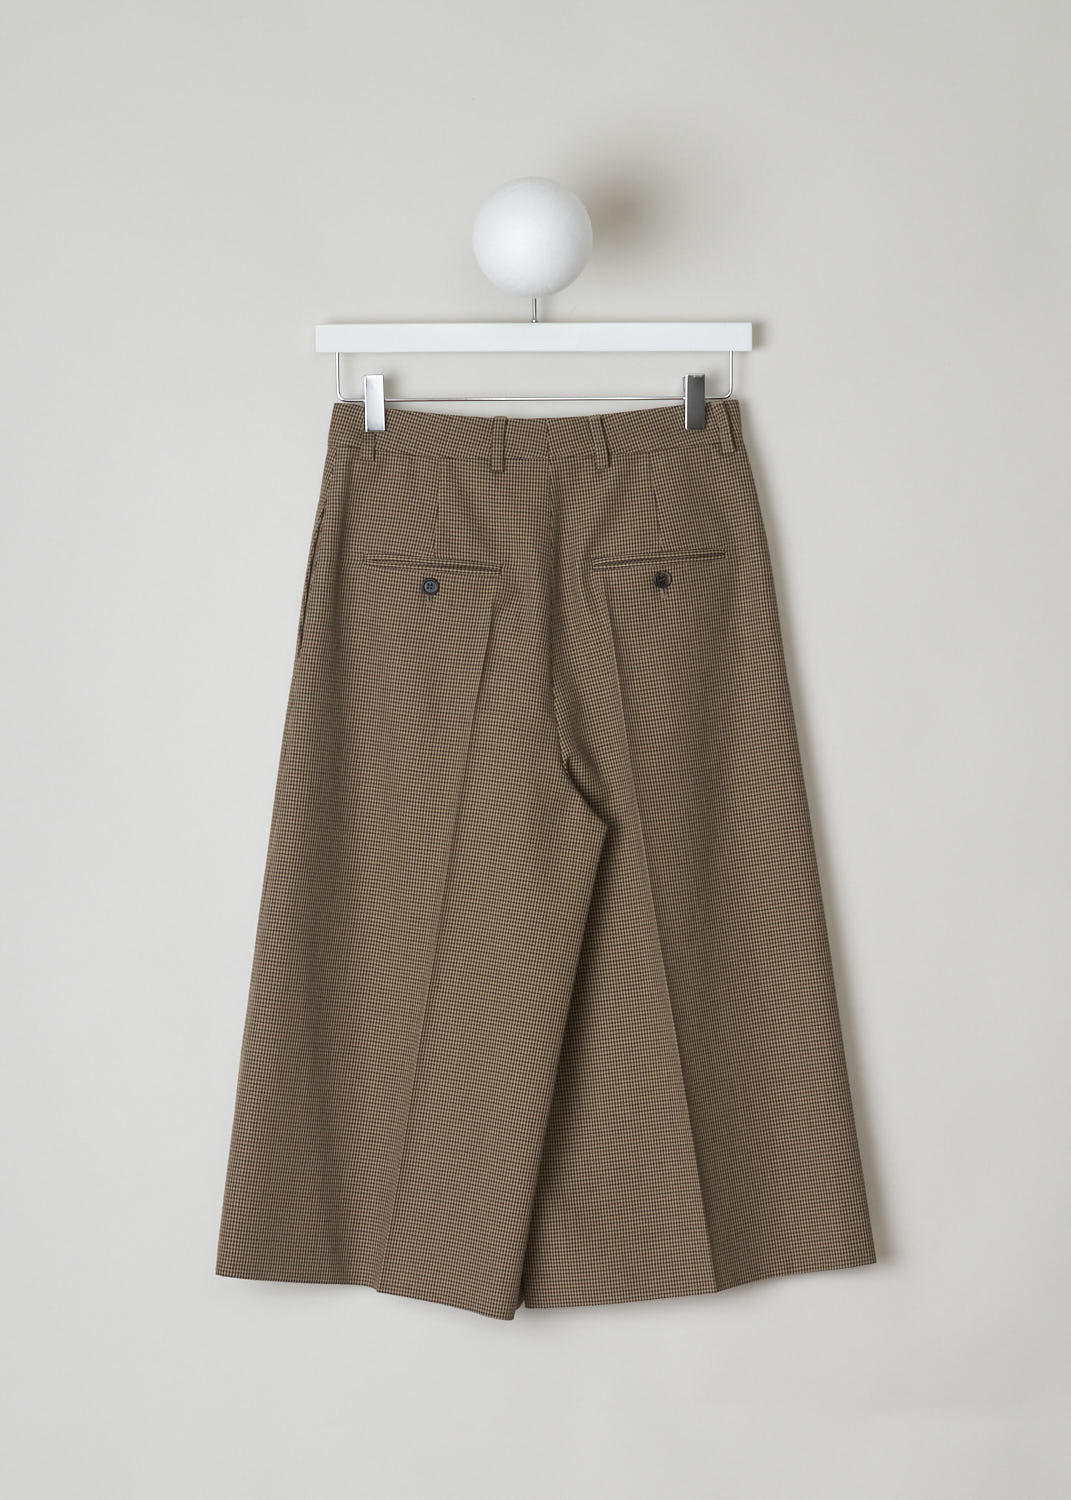 CELINE, BROWN HOUNDSTOOTH CULOTTES, 868H_2P233_28BZ, Brown, Print, Back, Brown Houndstooth culottes made from wool. These pants have belt loops and the closing option on this model is a concealed hook, button and zipper option. In the front, along the length of the pants, a front pleat can be found. These pants have slanted pockets in the front and two welt pockets in the back.
